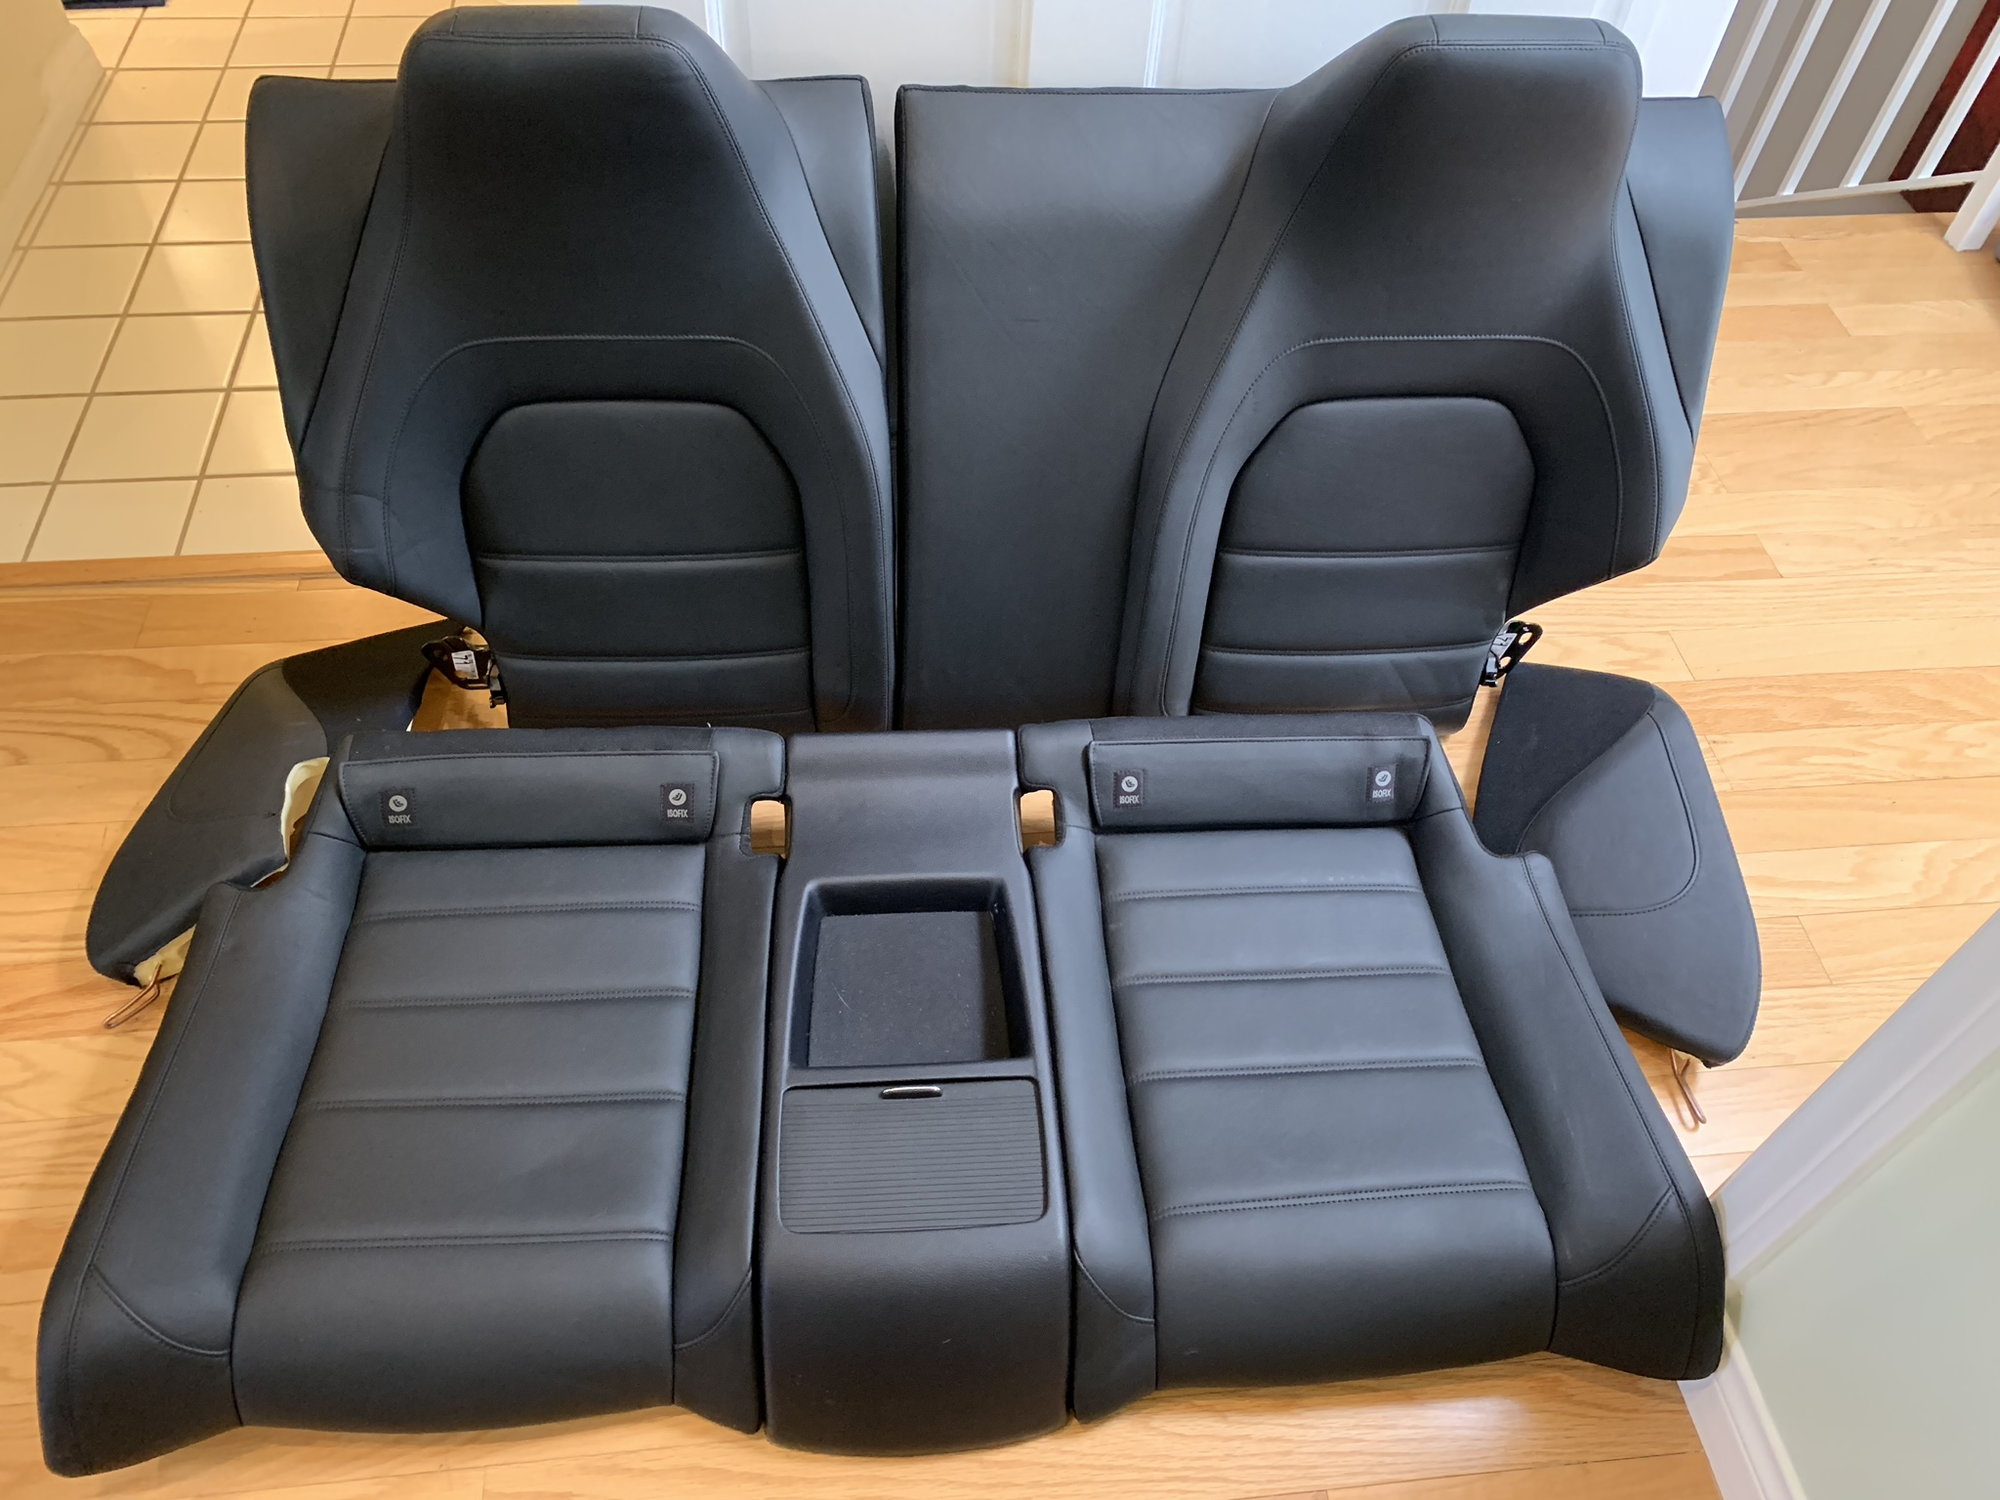 Interior/Upholstery - W204 C63 Coupe Front and Rear Seats - Used - 2008 to 2015 Mercedes-Benz C63 AMG - 2008 to 2015 Mercedes-Benz C300 - Santa Monica, CA 90403, United States